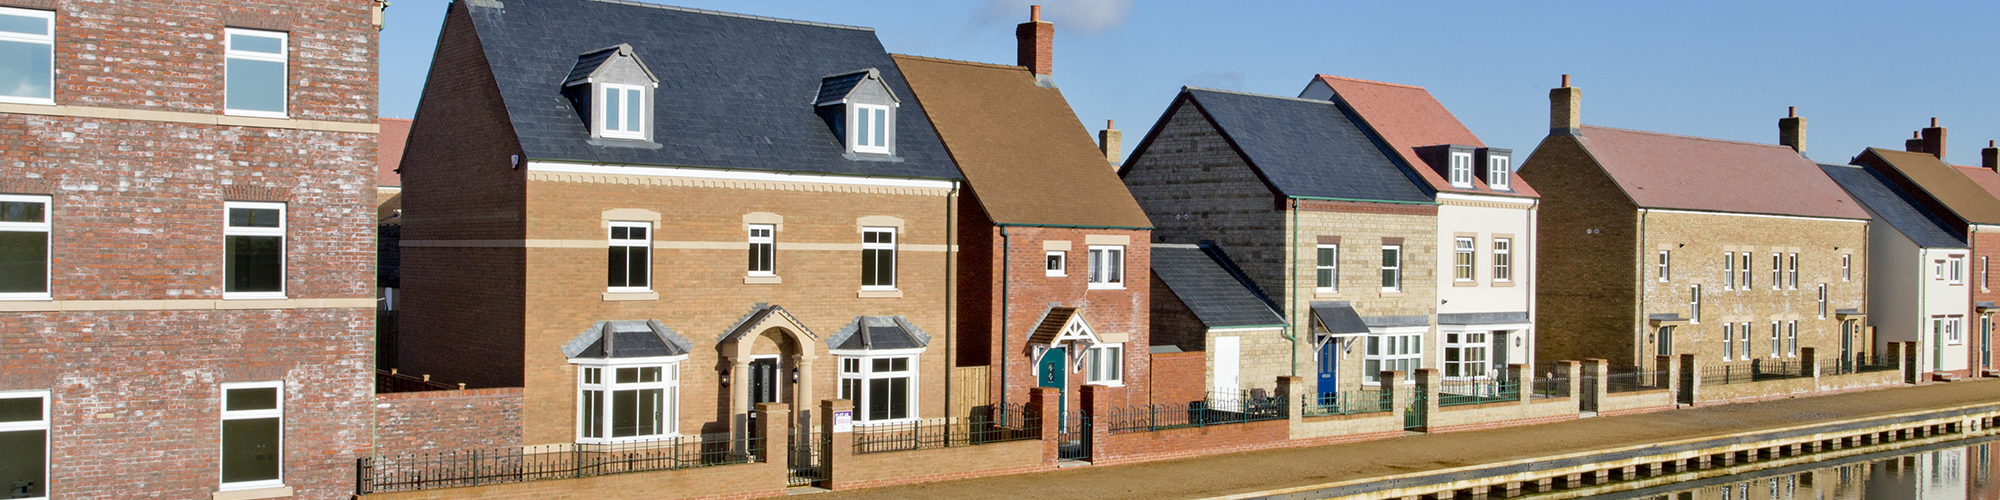 Buy through the Key Worker Housing Scheme with SAM Conveyancing